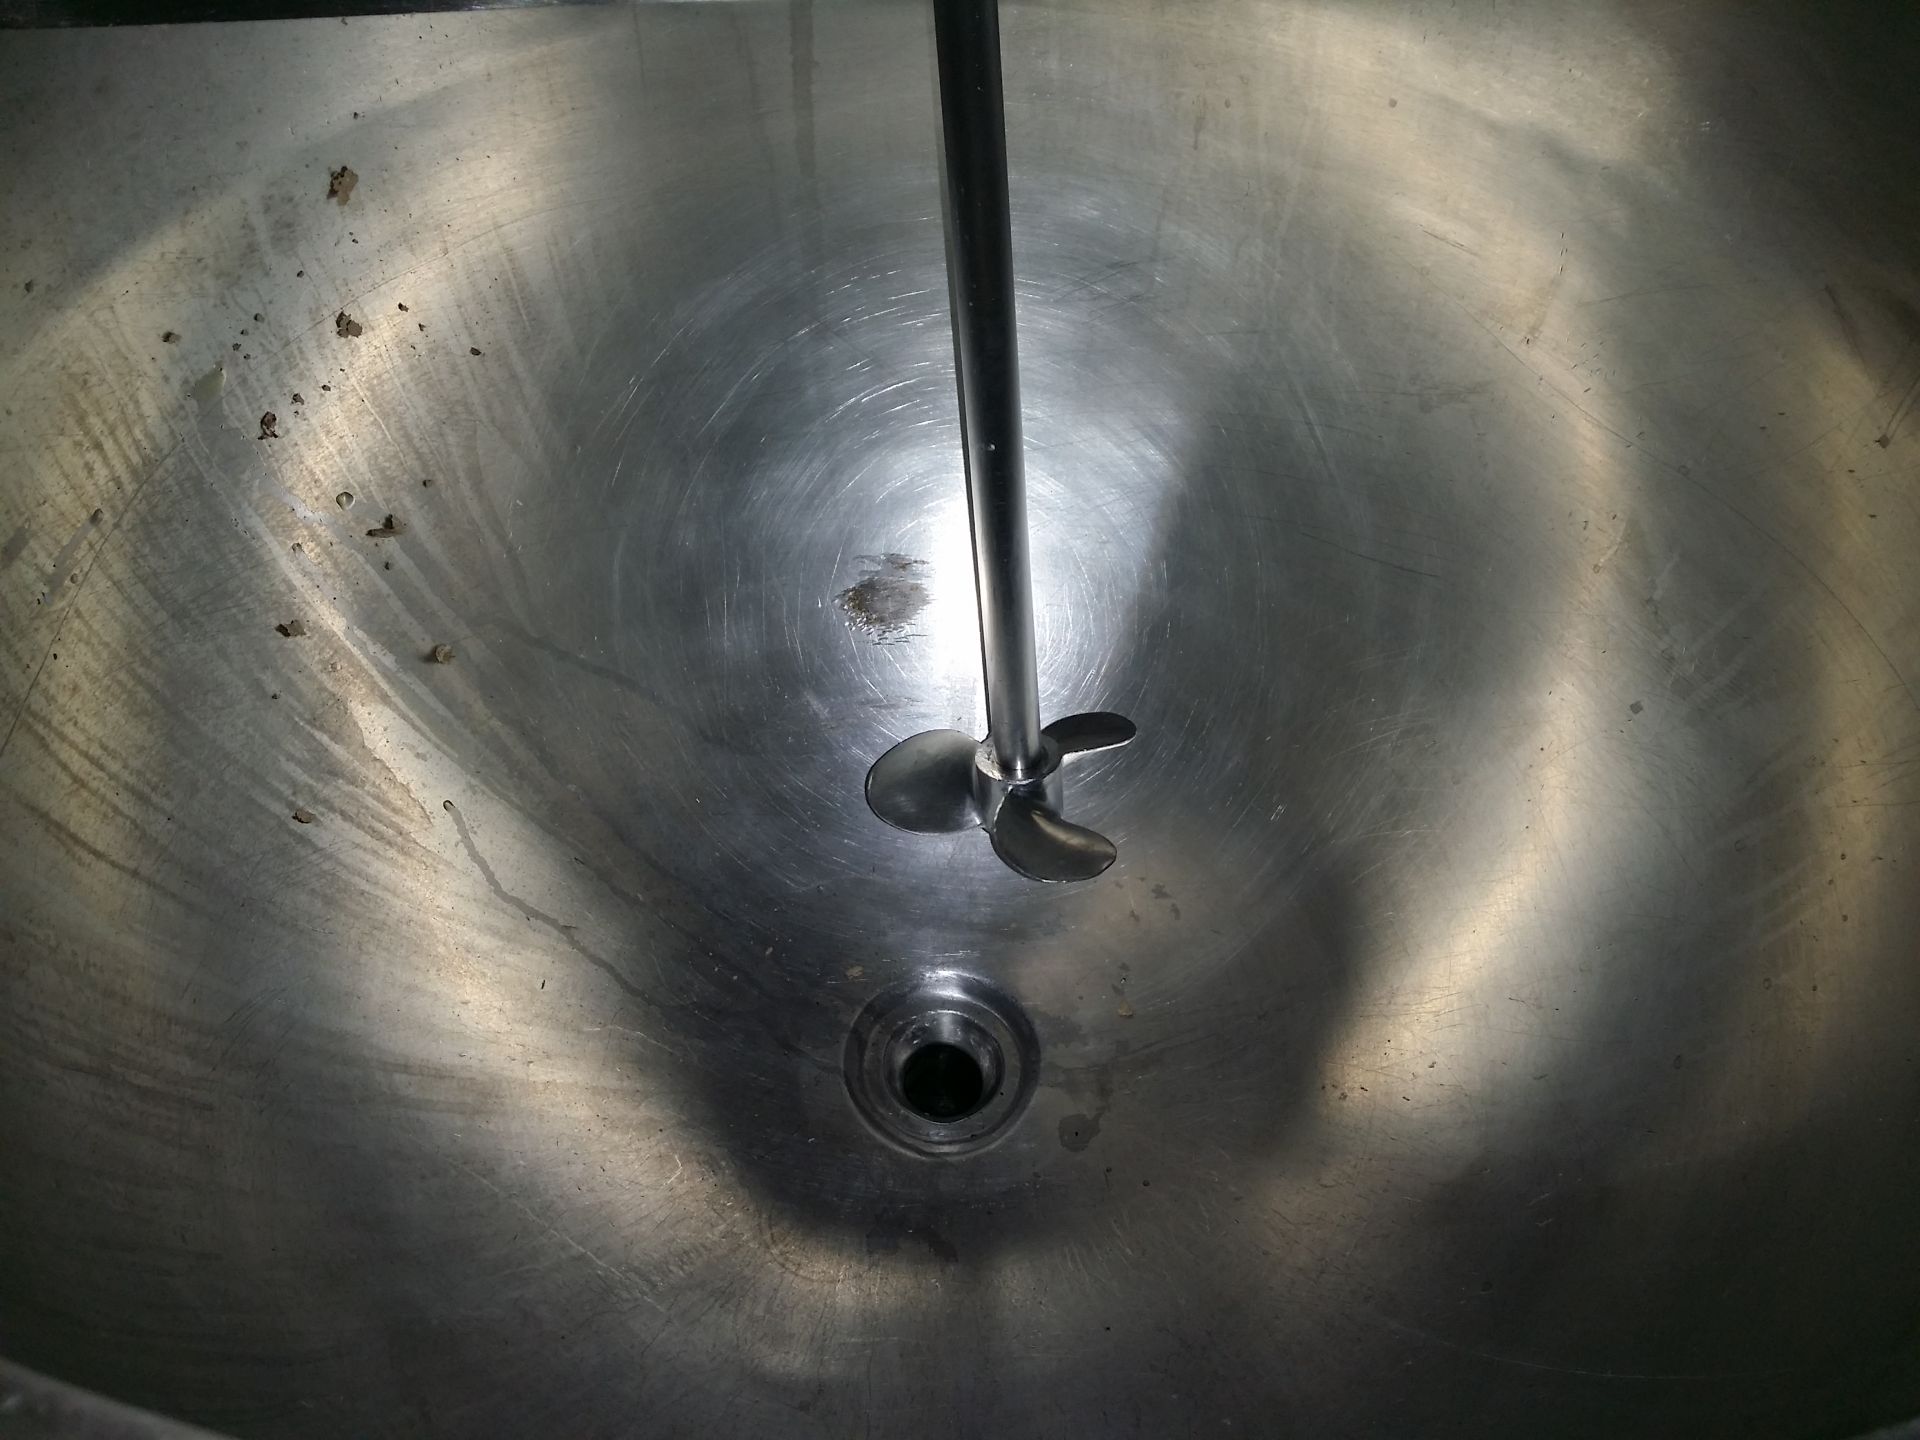 30 gallon Lee Industries kettle, stainless steel construction, open top with lid, hemispherical - Image 4 of 7